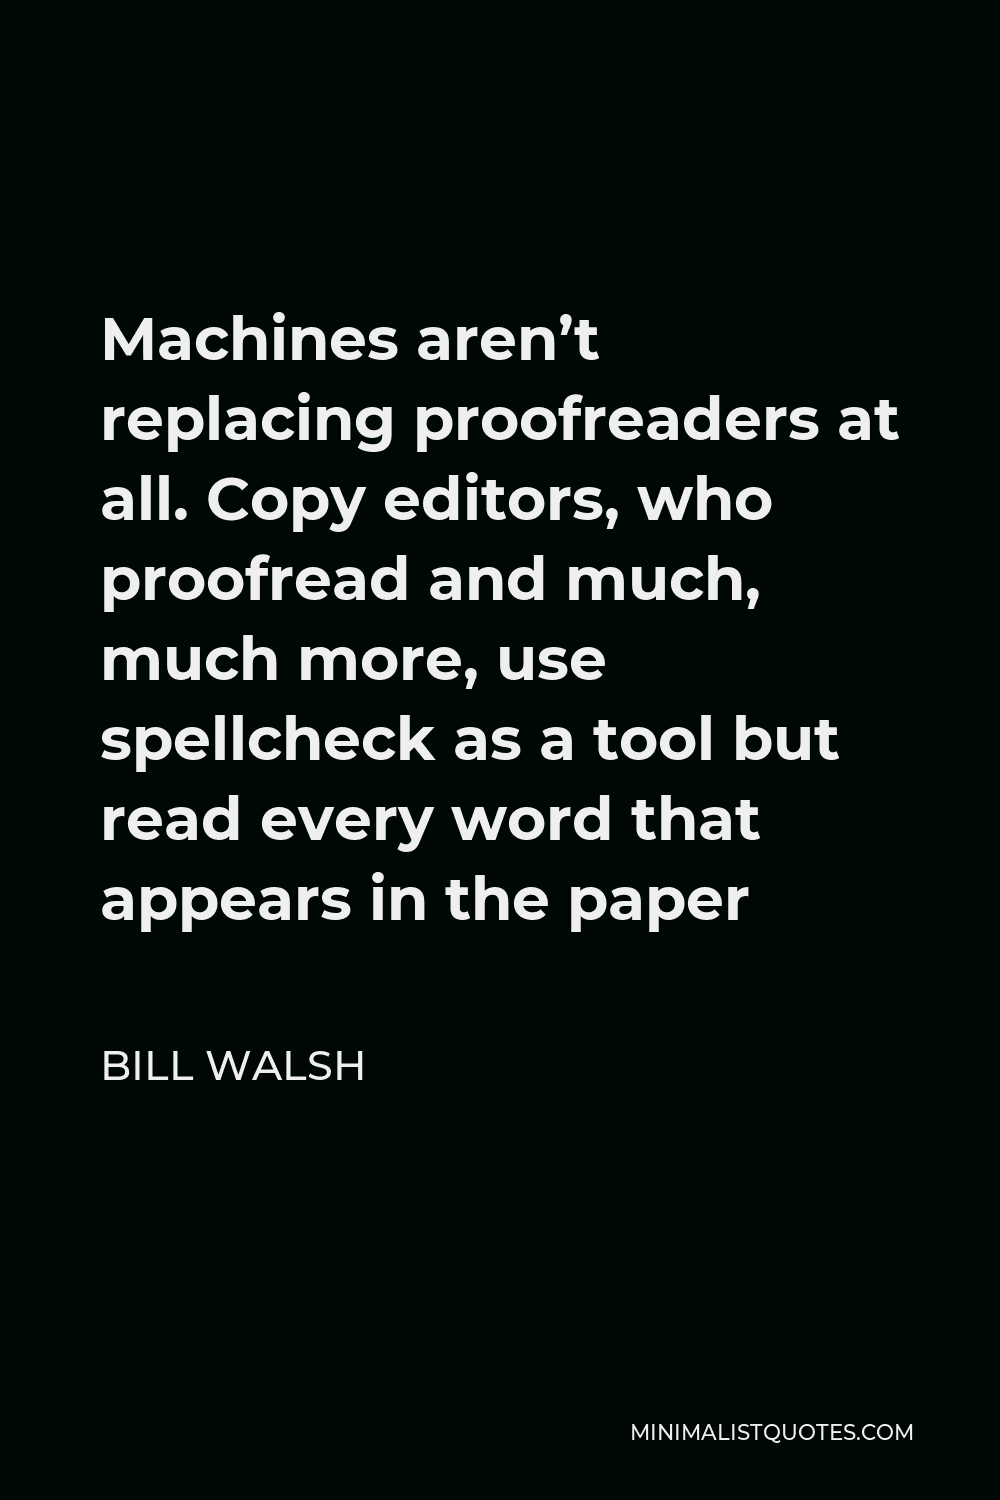 Bill Walsh Quote - Machines aren’t replacing proofreaders at all. Copy editors, who proofread and much, much more, use spellcheck as a tool but read every word that appears in the paper